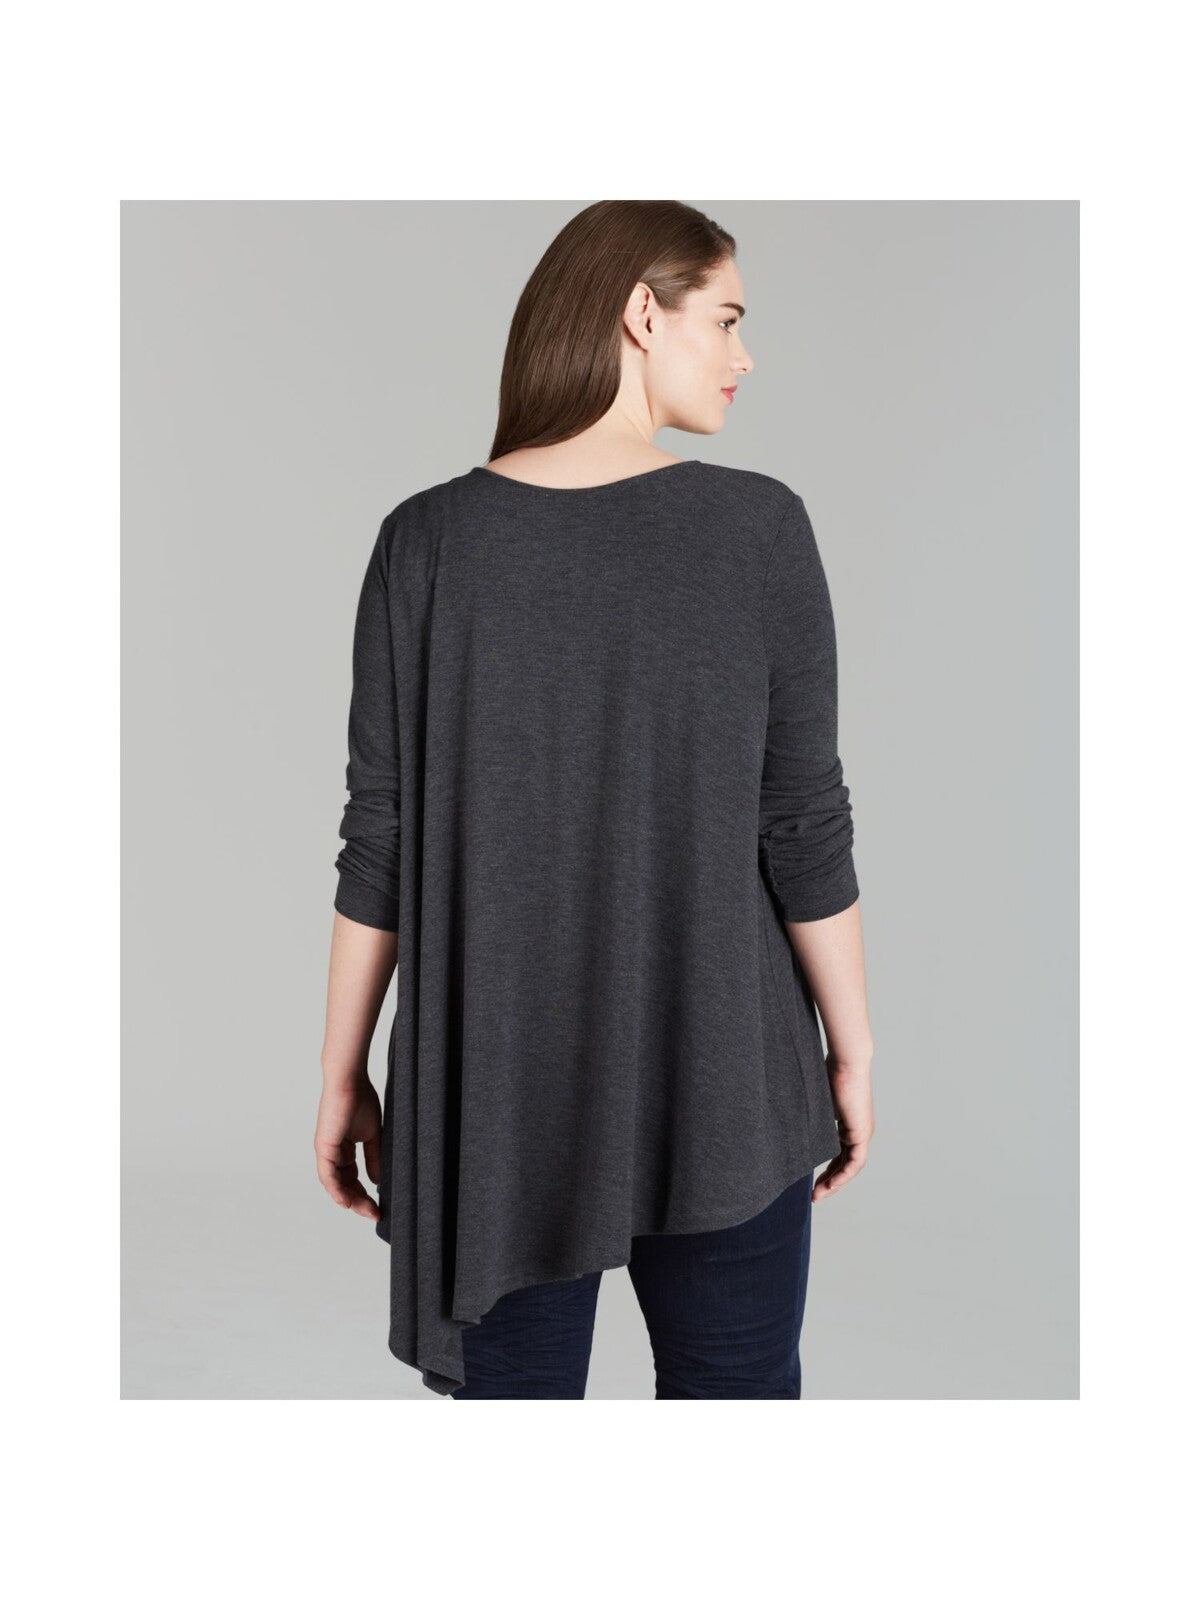 THREE DOTS Womens Stretch 3/4 Sleeve Scoop Neck Top